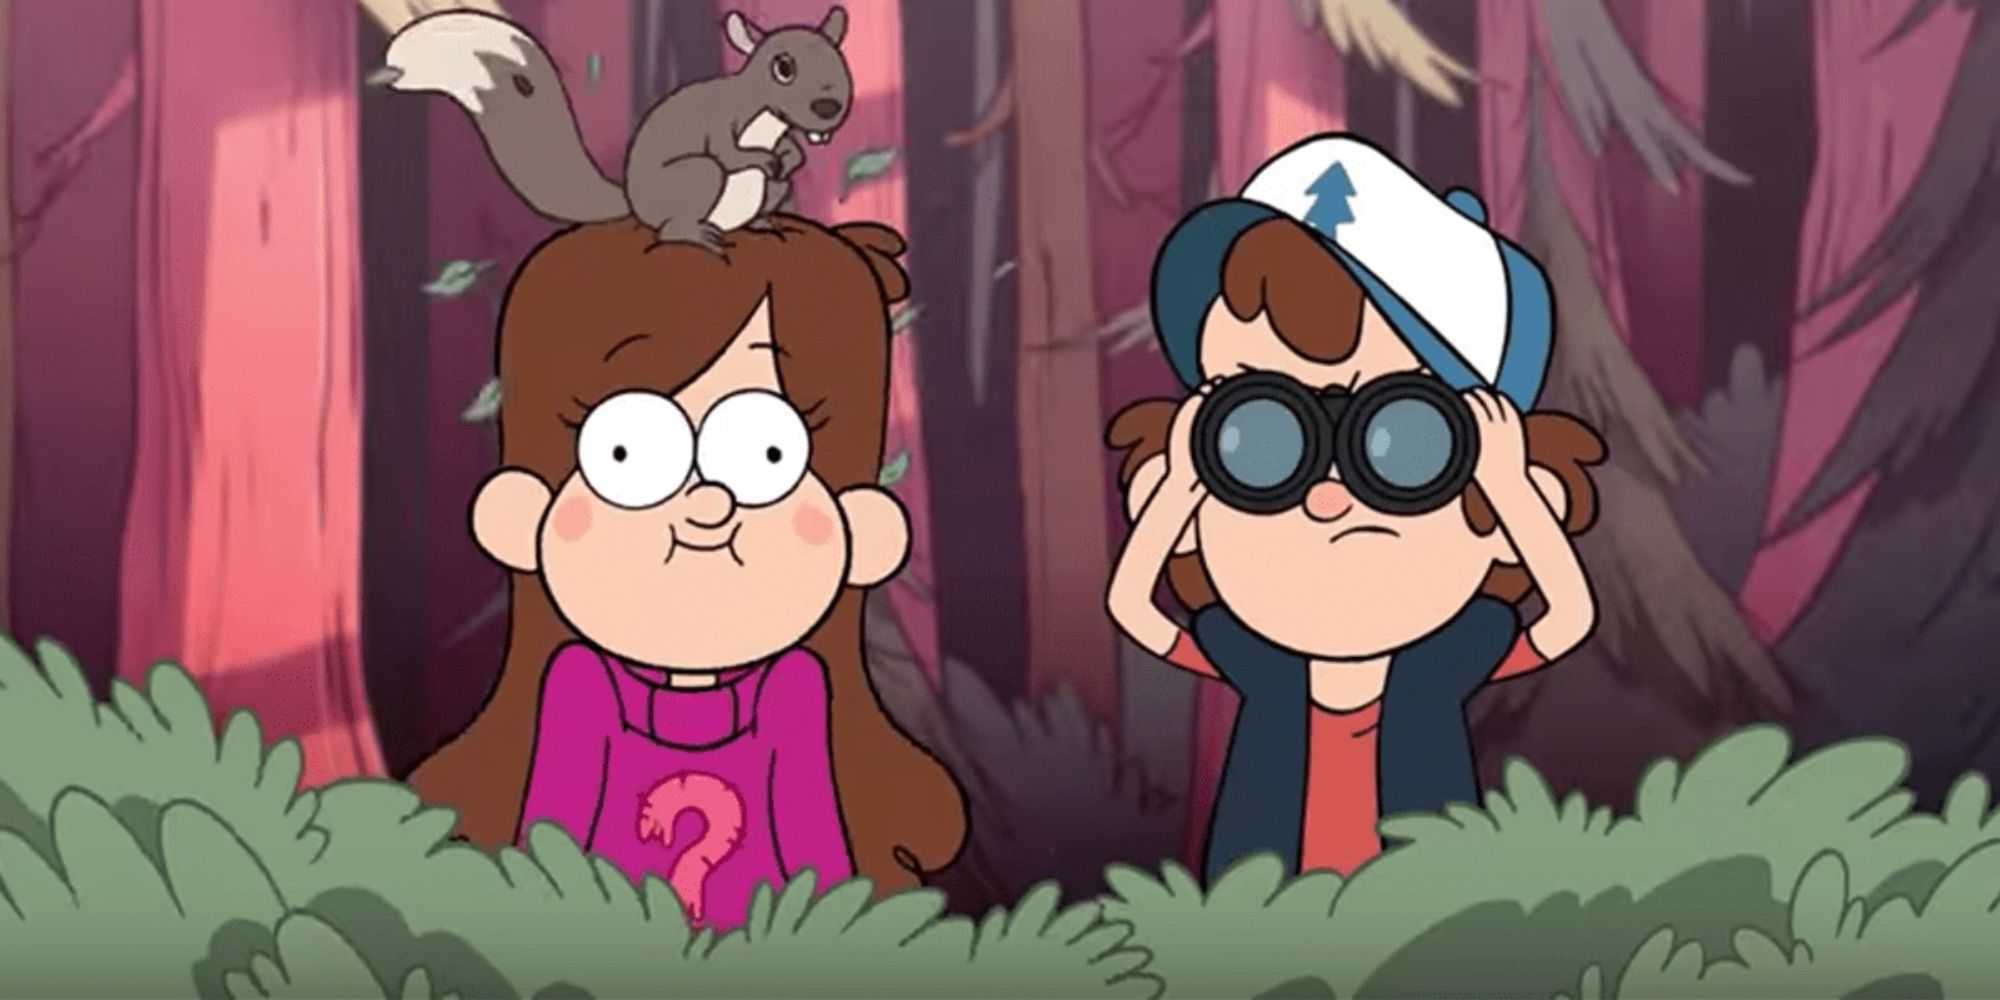 Dipper and Mabel watching from bushes in 'Gravity Falls'